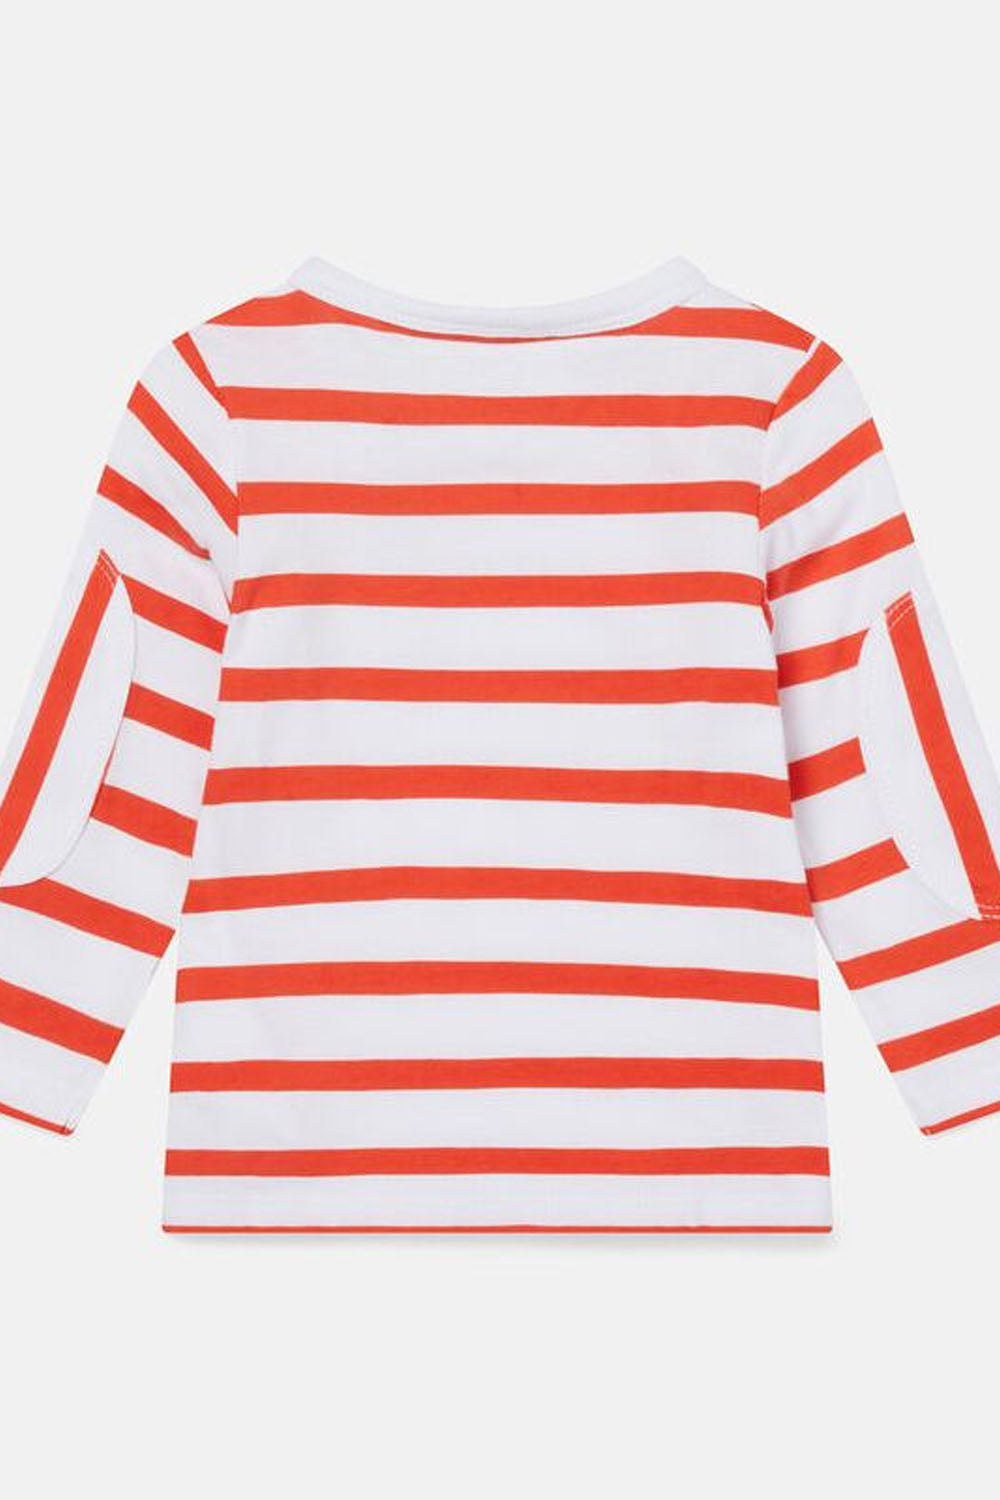 Striped Jersey T-Shirt W/Badge for Boys - Maison7